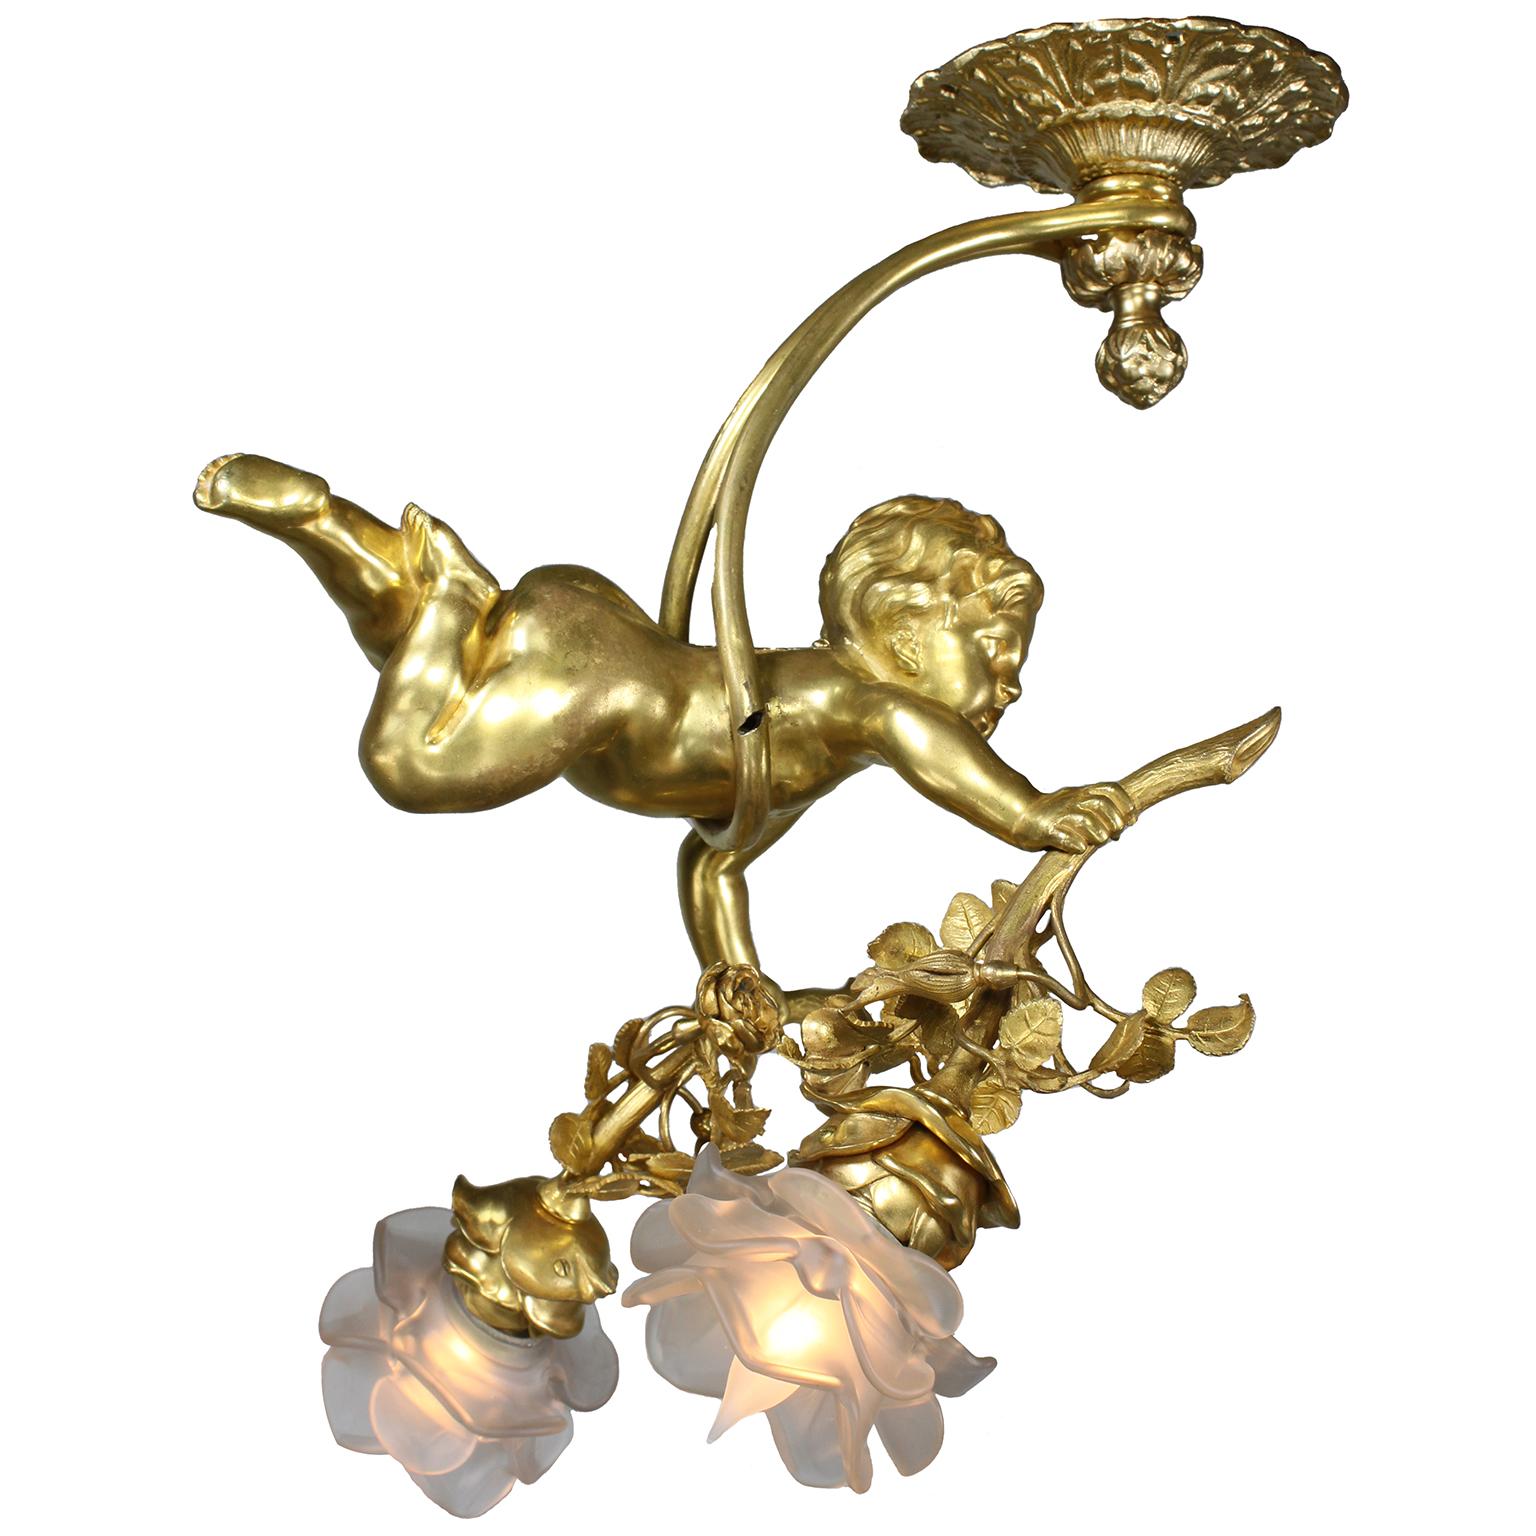 Whimsical French 19th/20th Century Gilt-Bronze Belle Époque Putto Chandelier In Good Condition For Sale In Los Angeles, CA